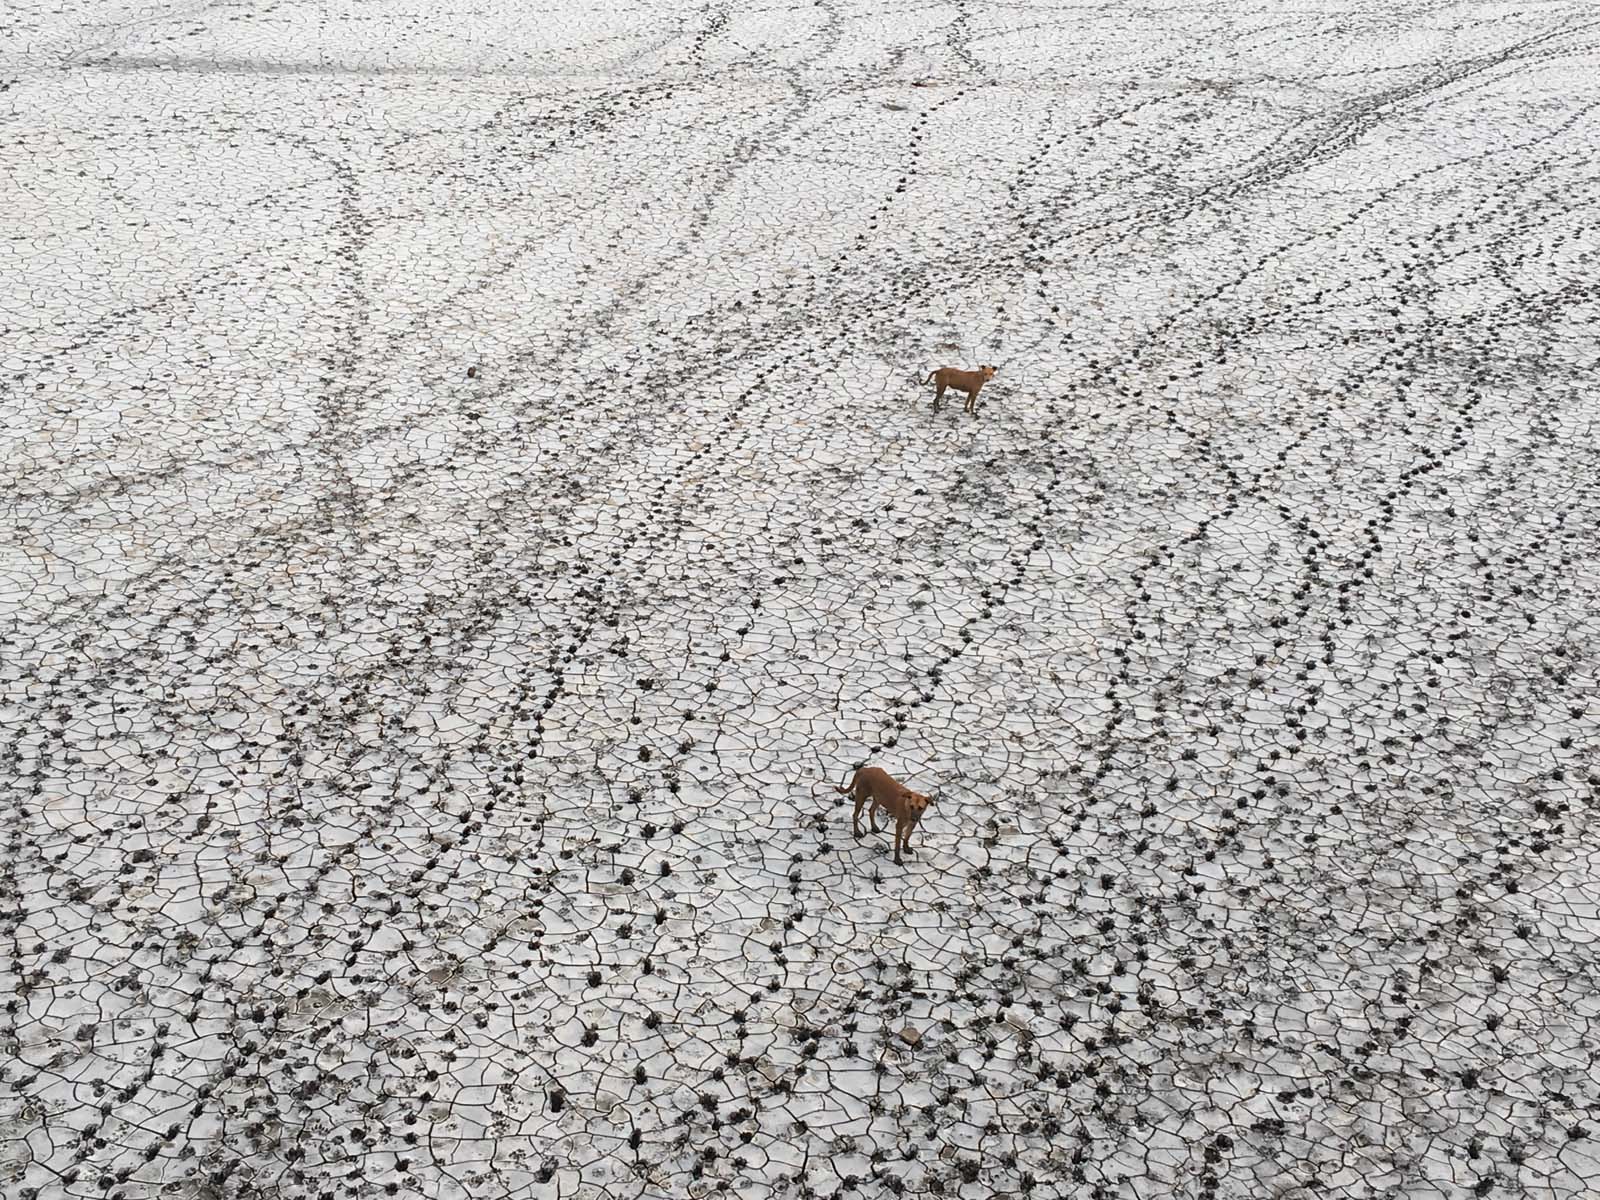 Two dogs were walking on the salty land.Several footprint were seen on it.It was looking like god has done white paint on the land with design on it.I took this snap,near the Tapi riverbed.Surat is located on the bank of river Tapi.